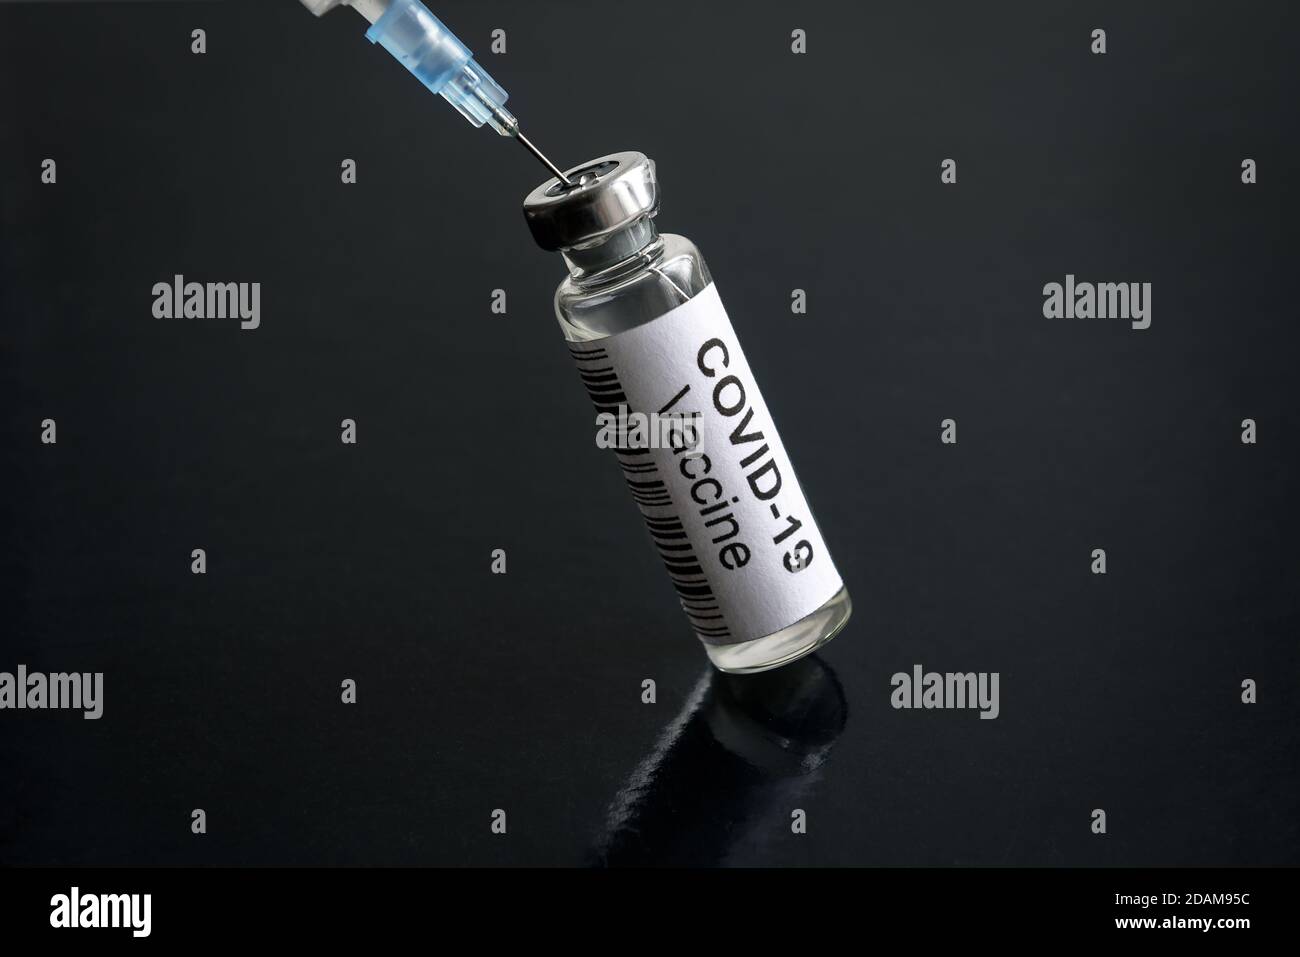 COVID-19 vaccine on black desk, syringe and bottle with vaccine for coronavirus cure. Concept of corona virus research, treatment, injection, shot and Stock Photo